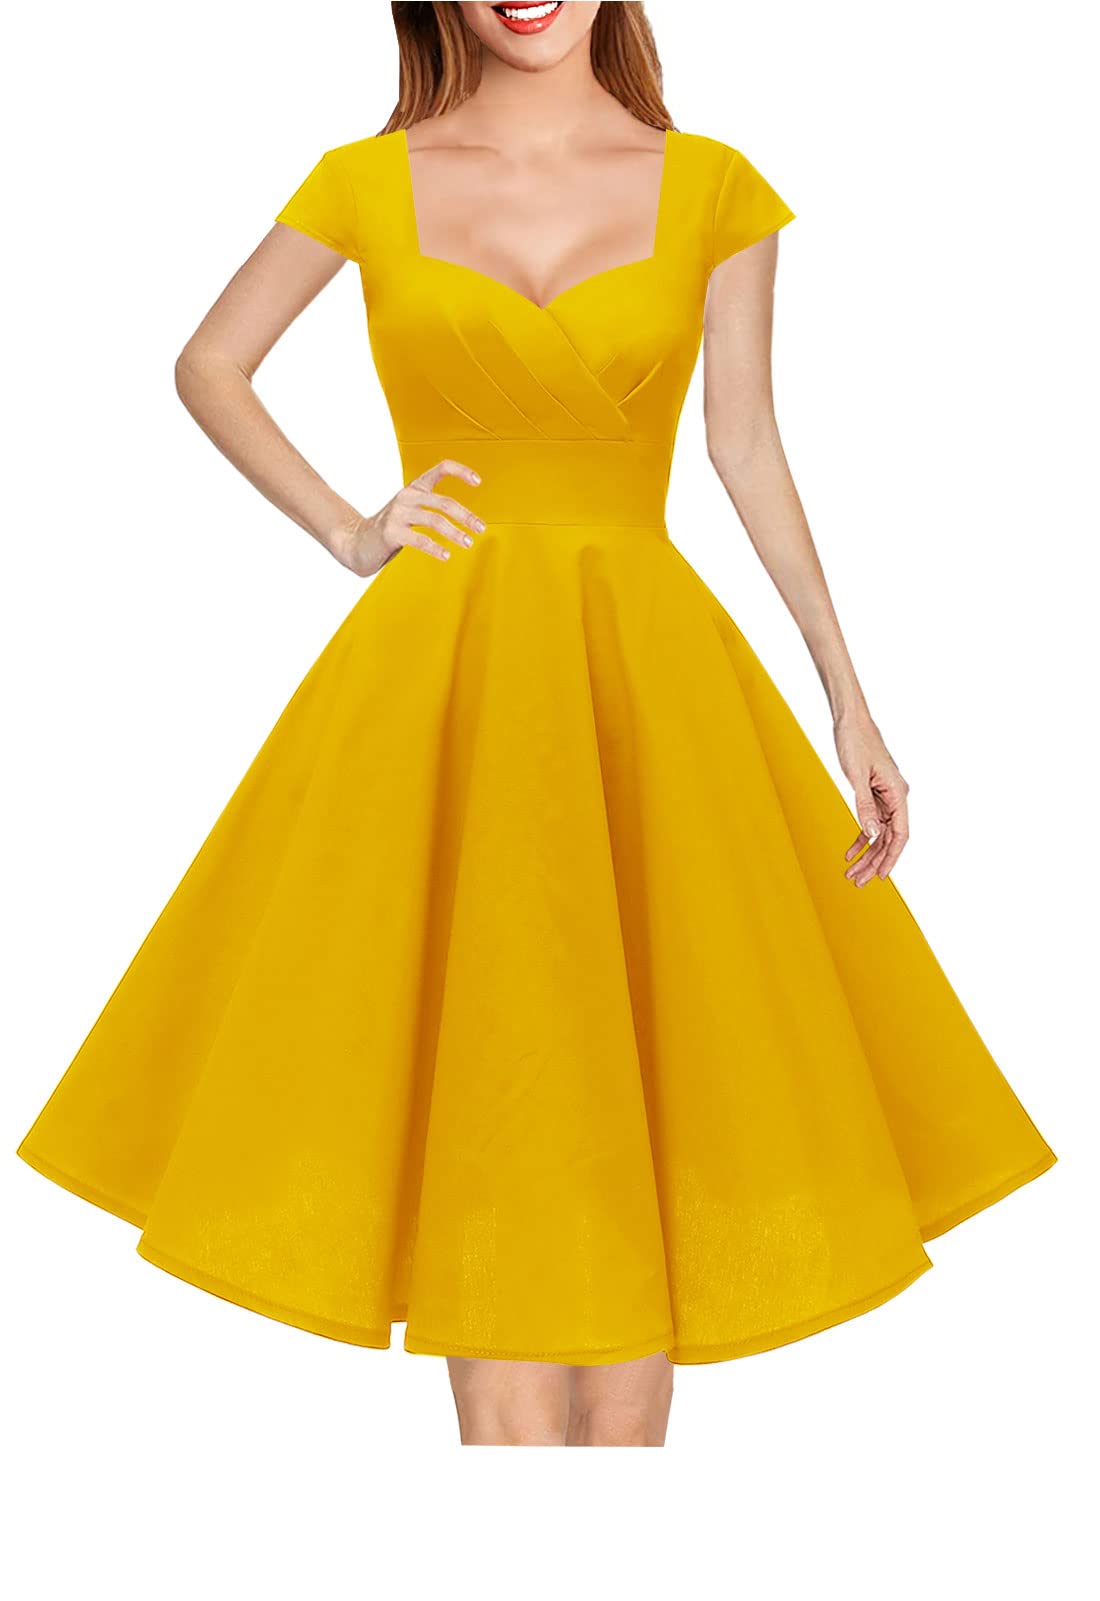 Hanpceirs Women's Cap Sleeve 1950s Retro Vintage Cocktail Swing Dresses with Pocket